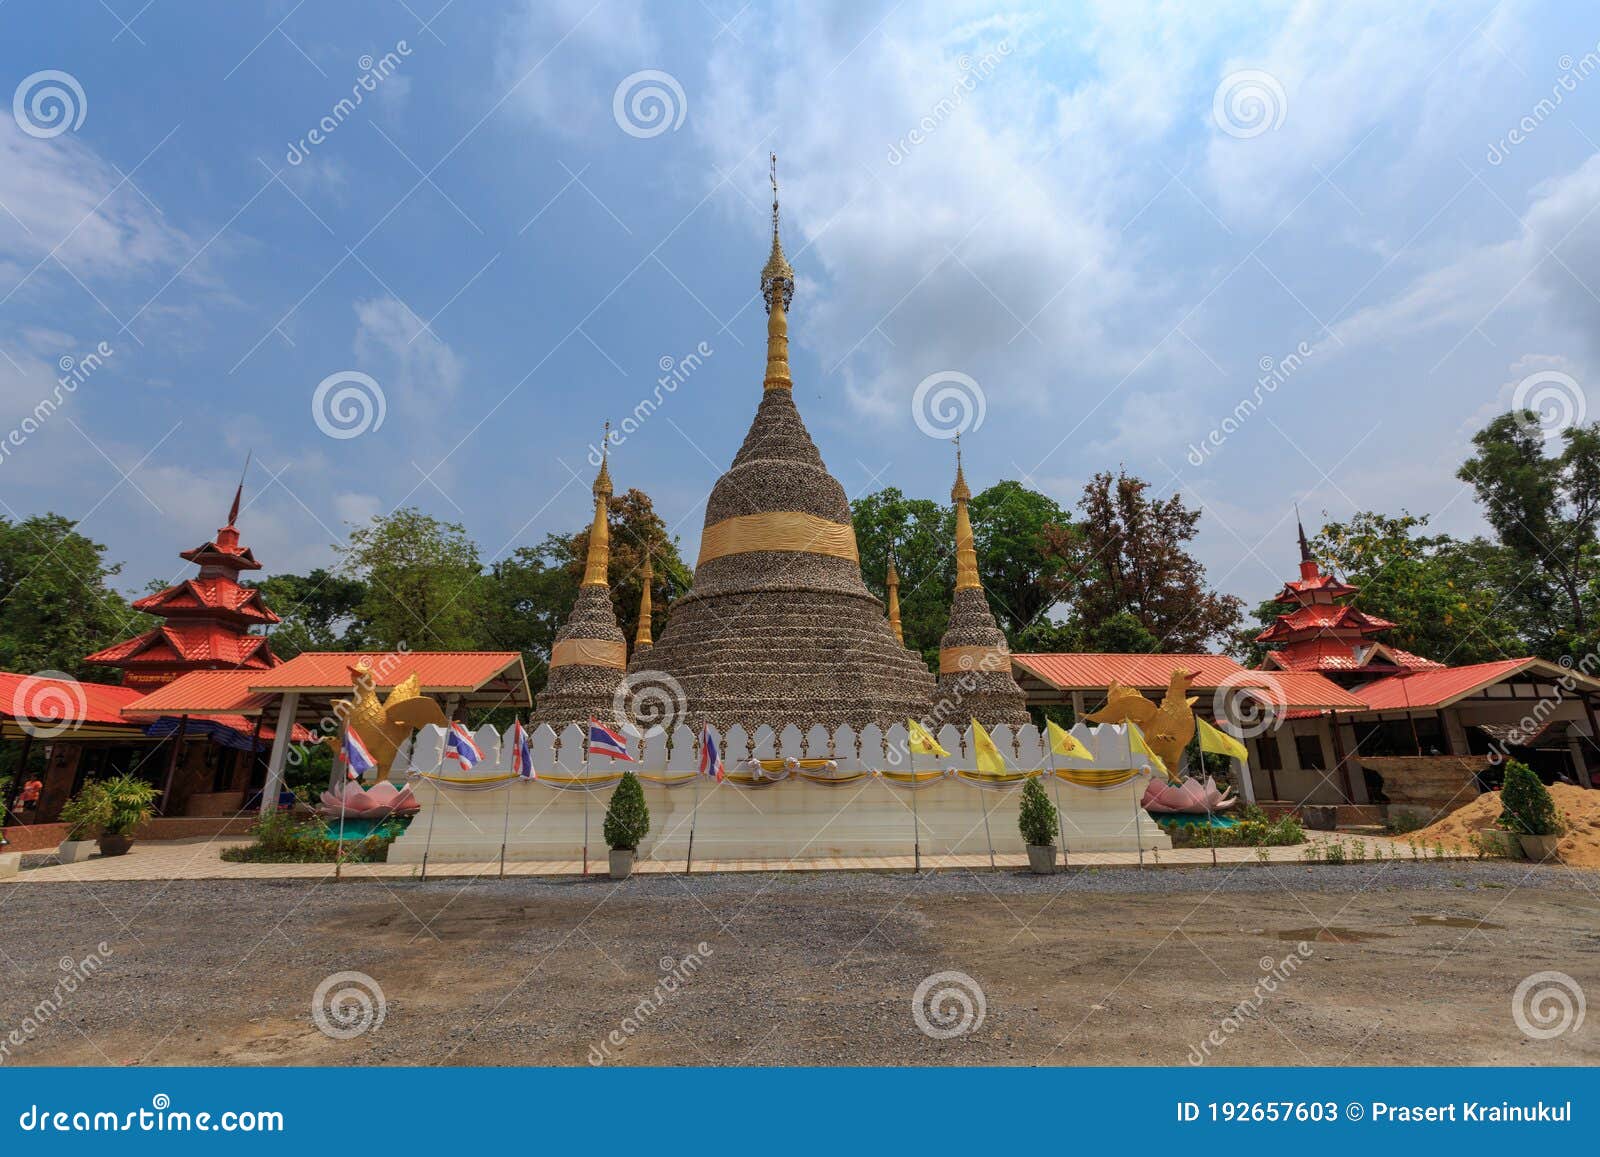 Wat Chedi Hoi The Oyster Shell Temple Pathum Thani Thailand Stock Image Image Of Design Isolated